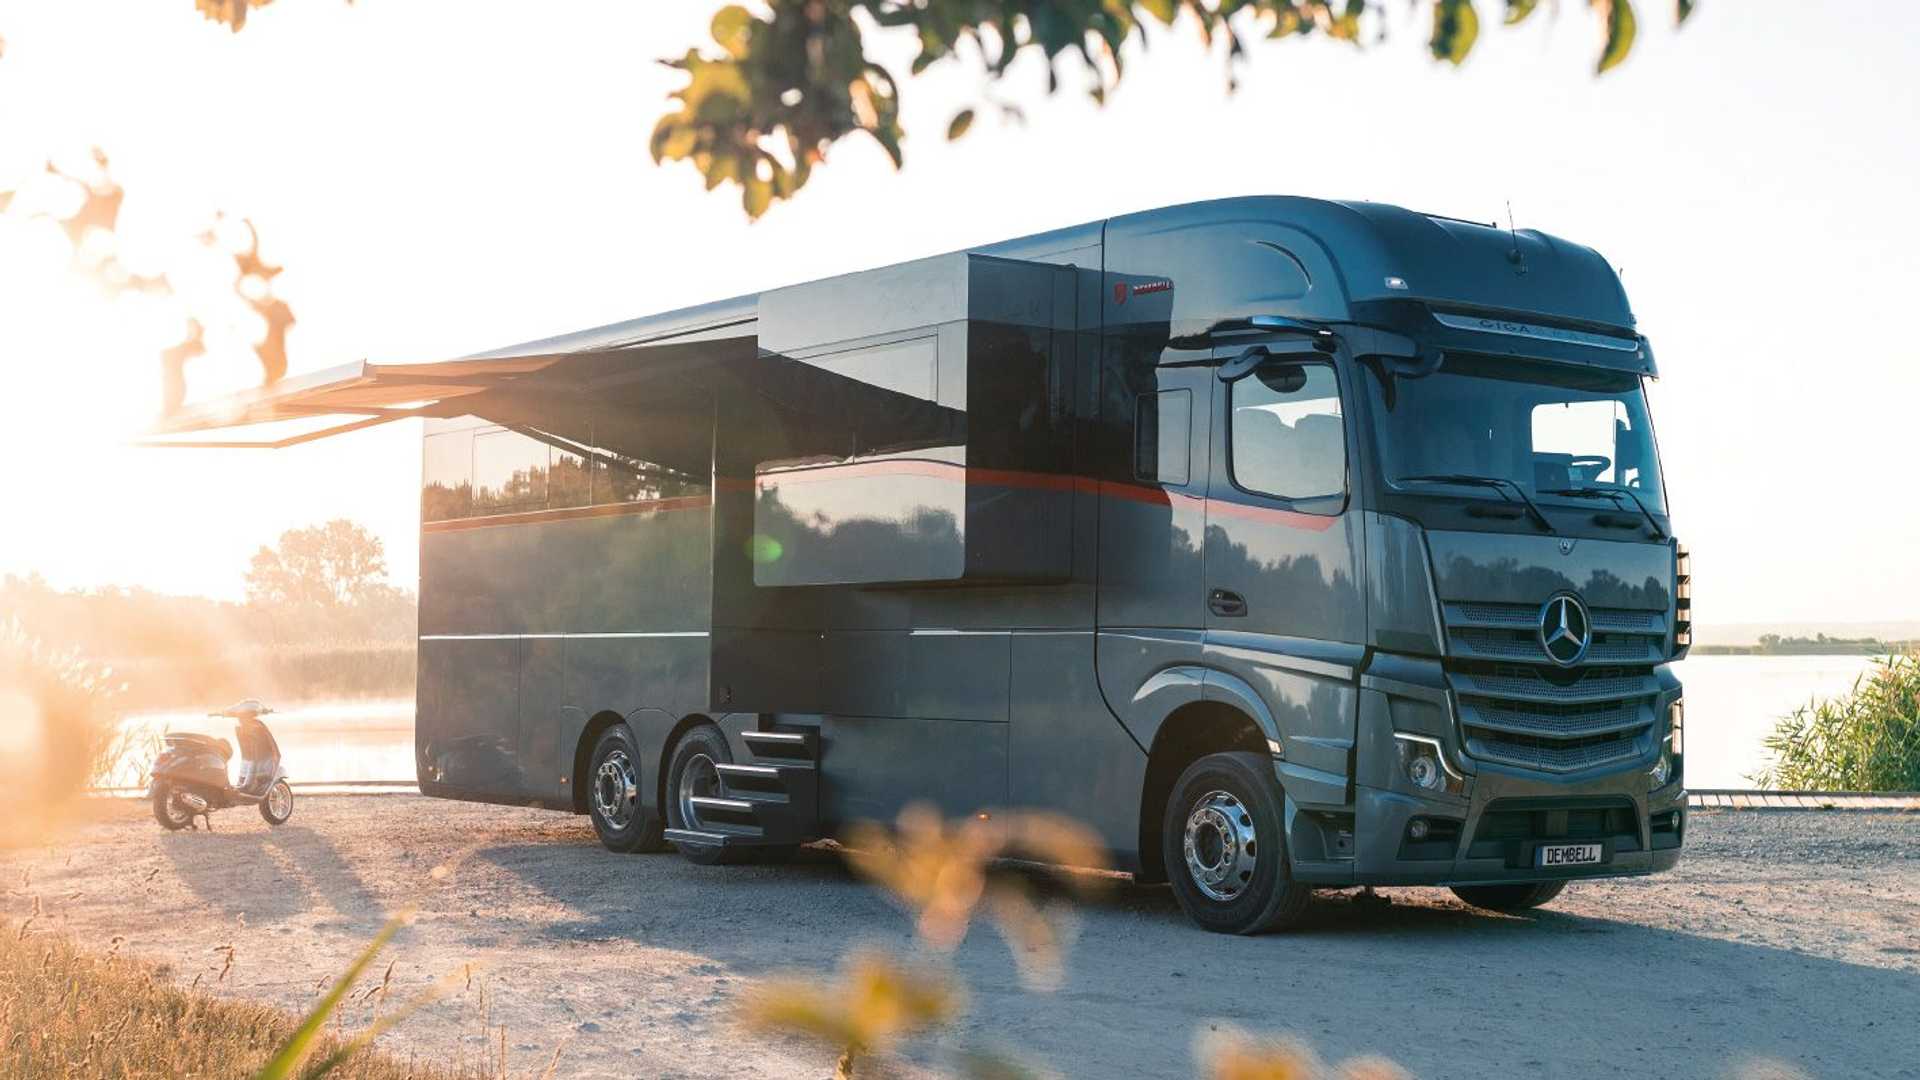 Dembell Motorhomes – an ultra-luxury mobile home